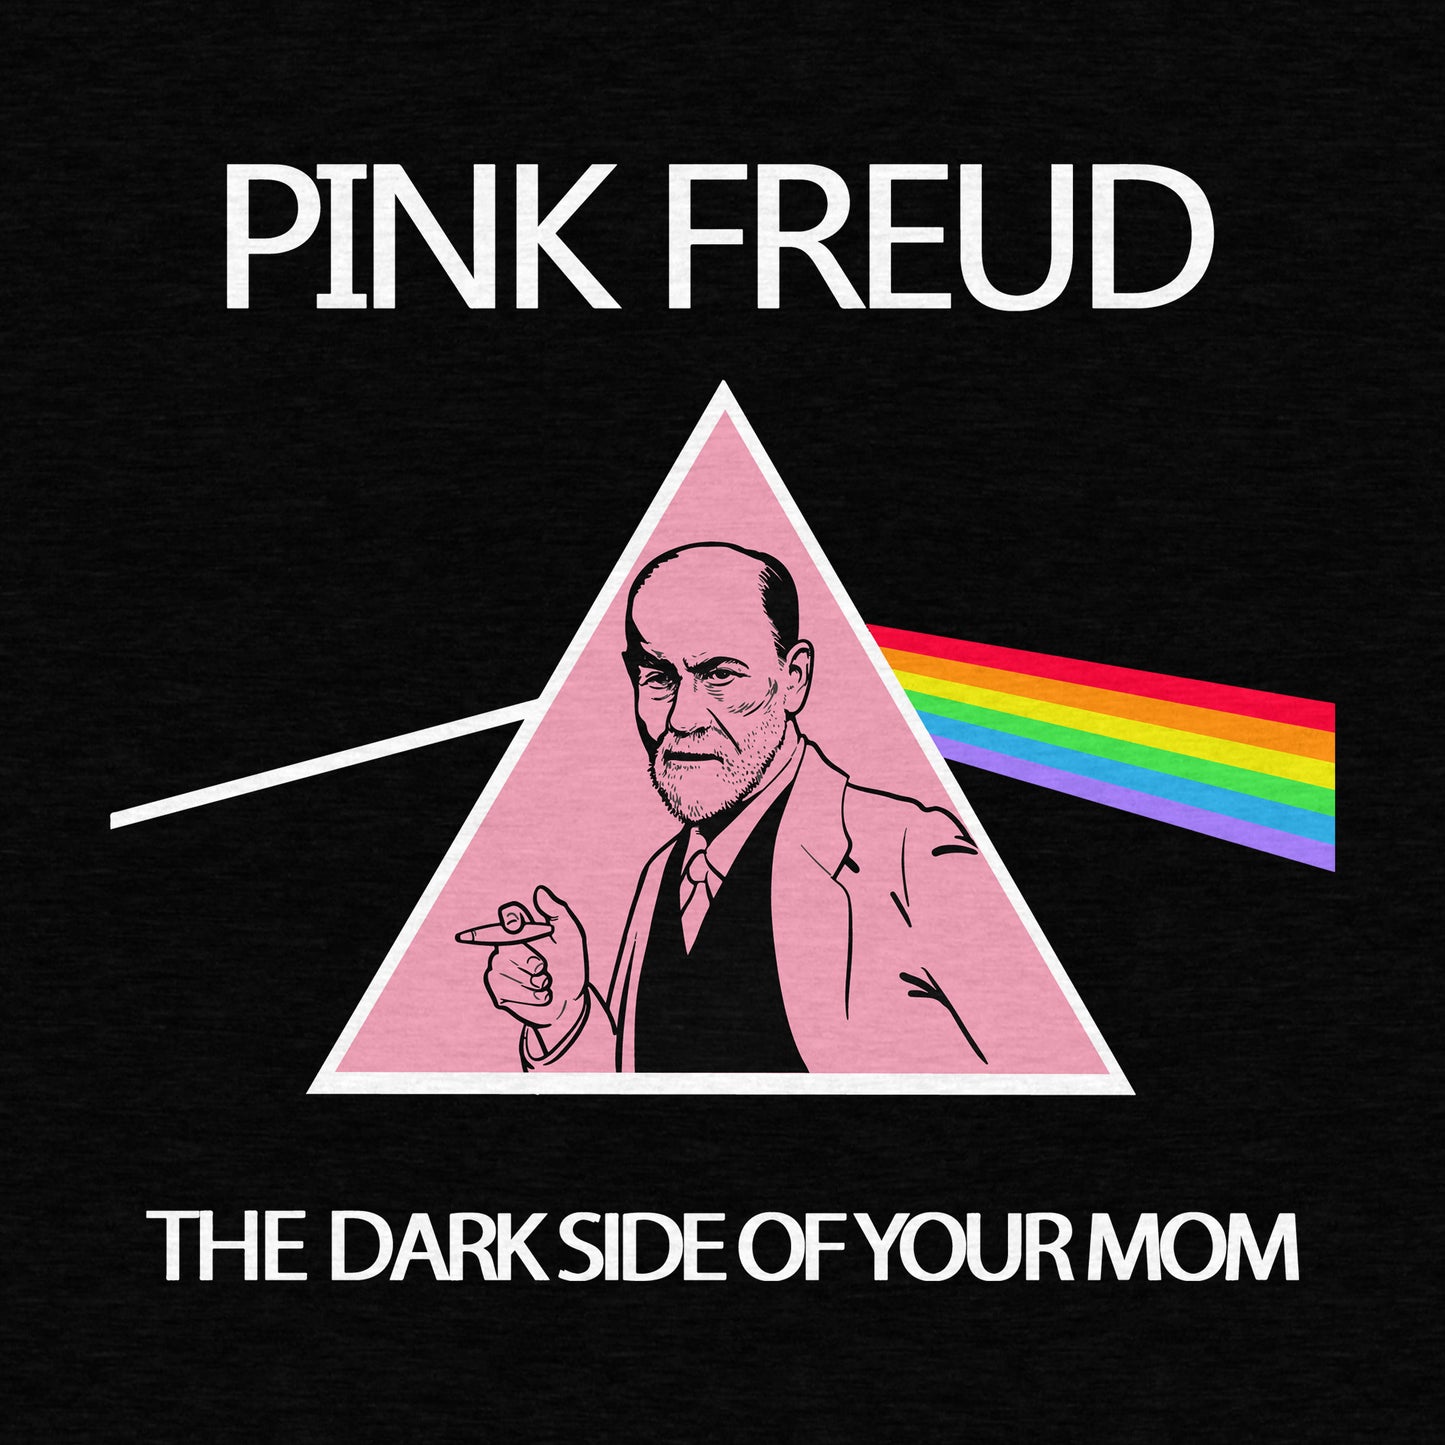 Pink Freud Dark Side of Your Mom - Men's Cotton Tee